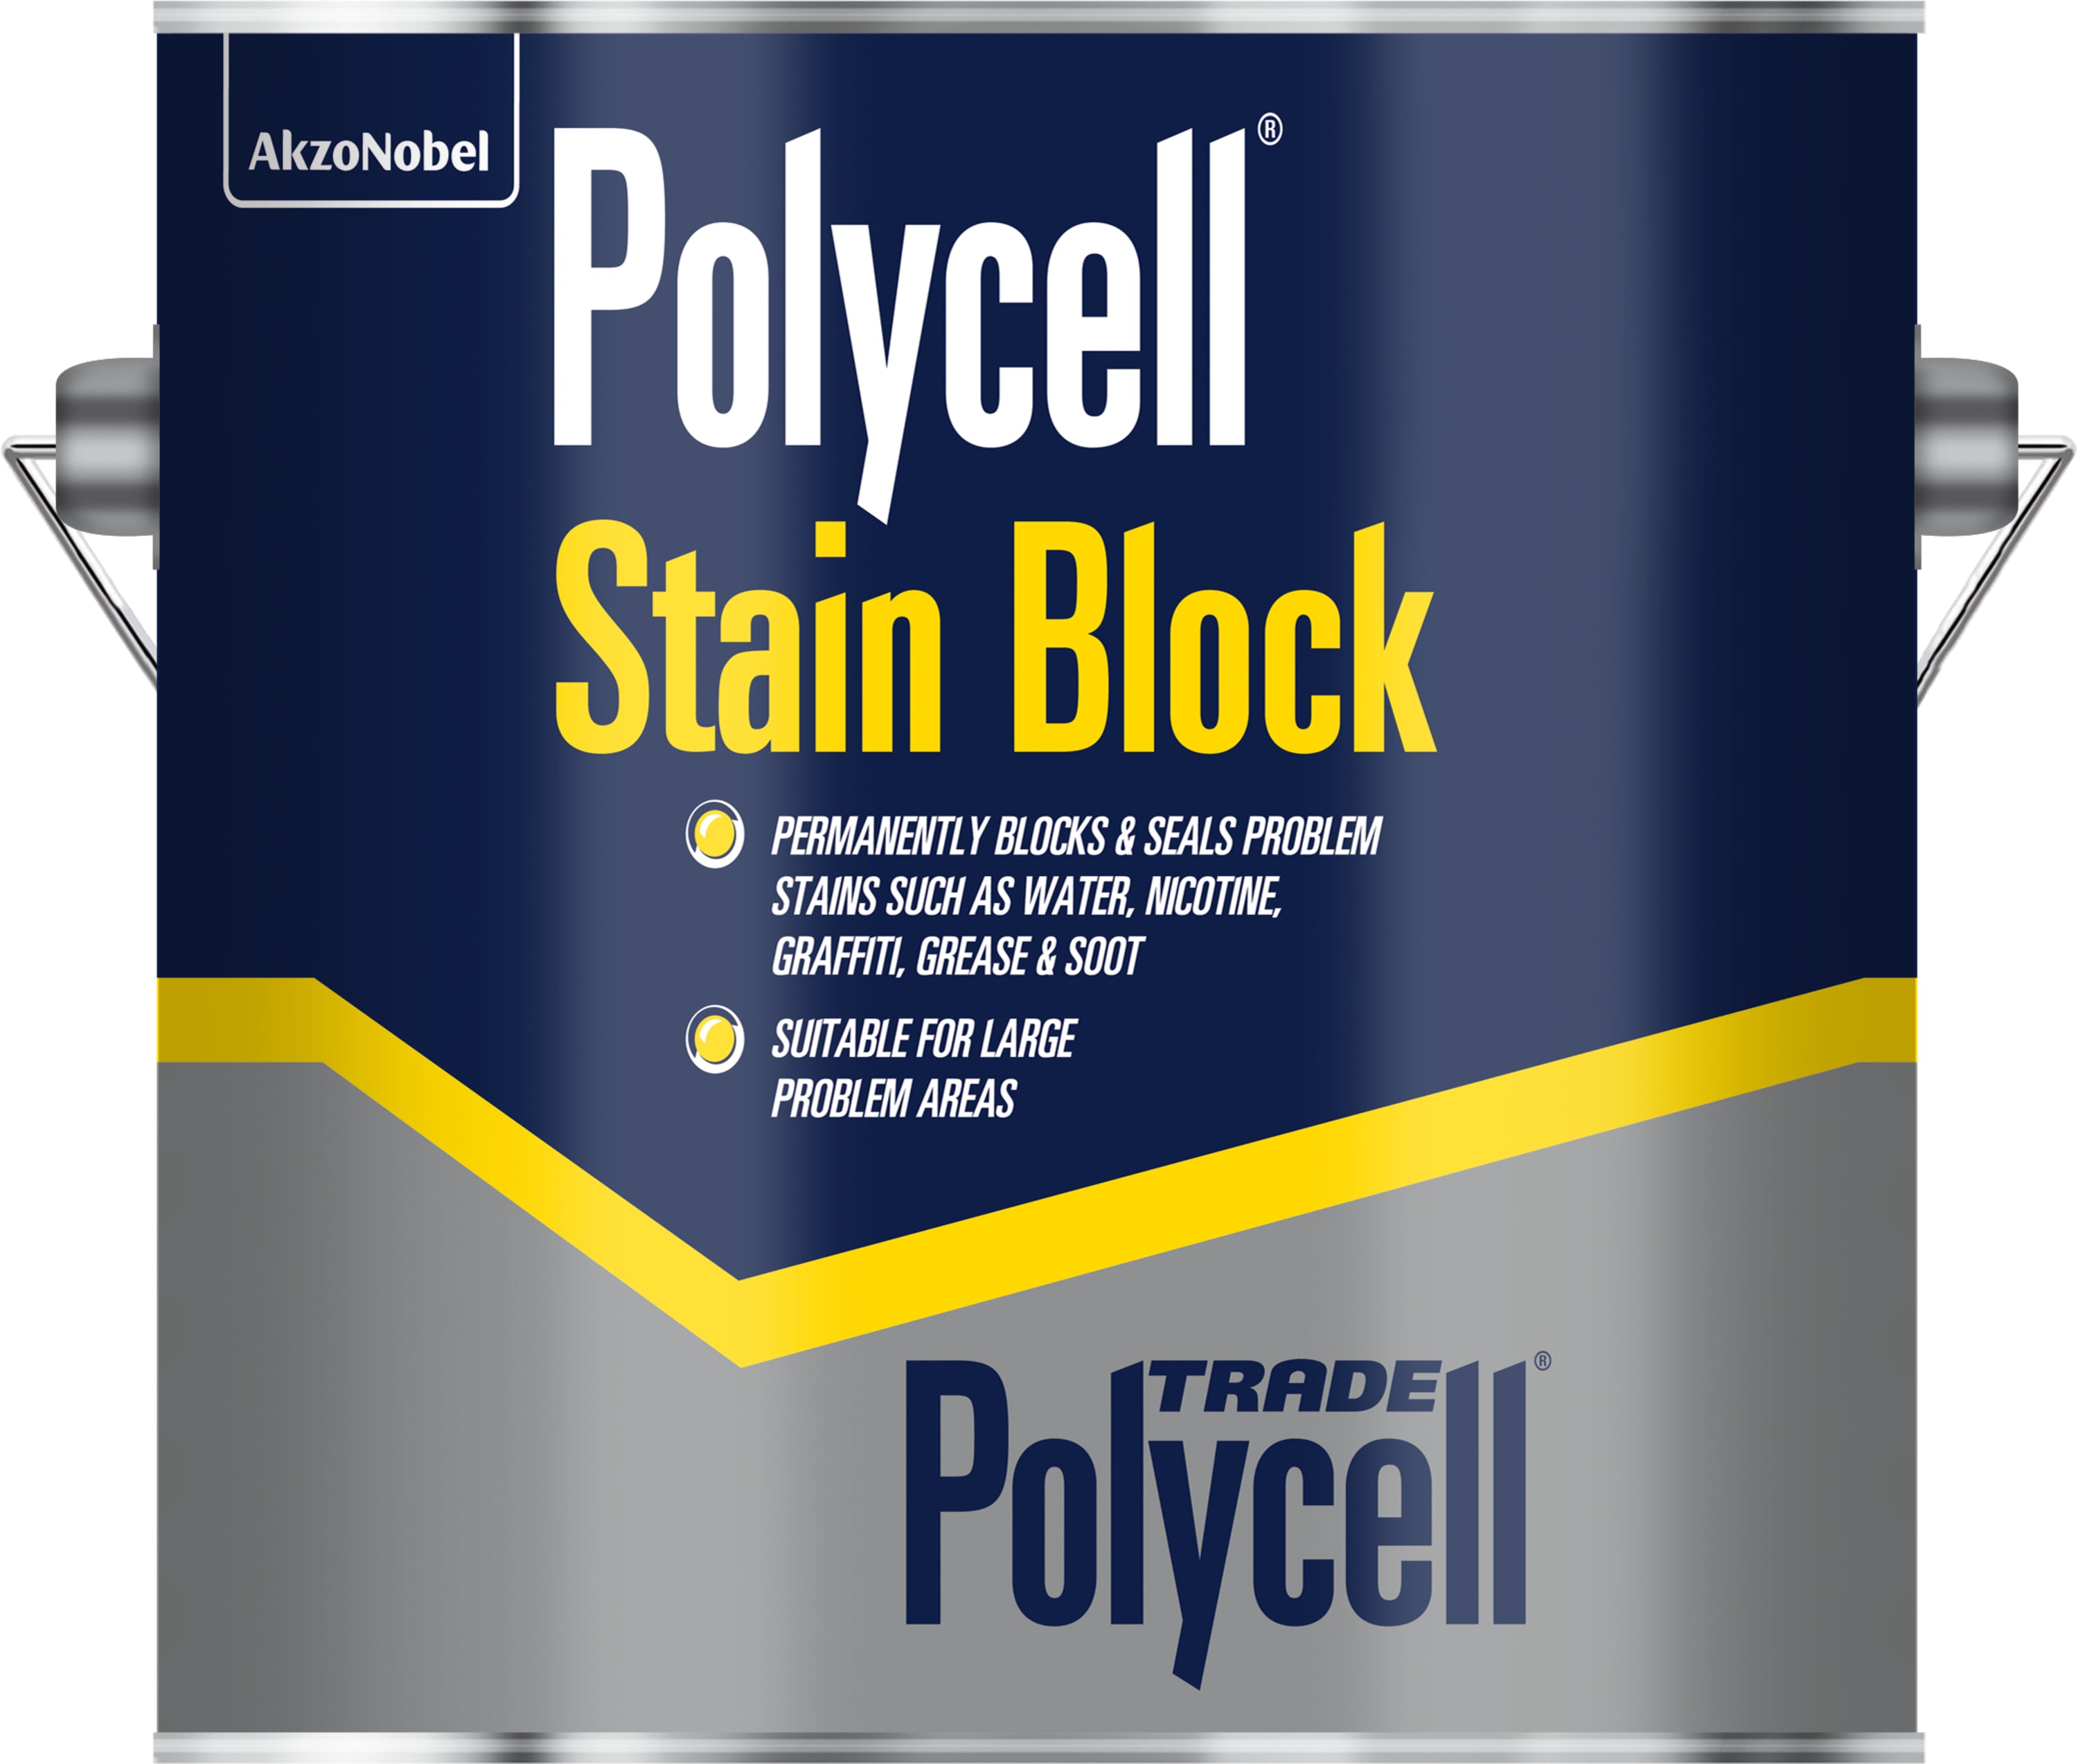 Polycell Trade -Stain Block